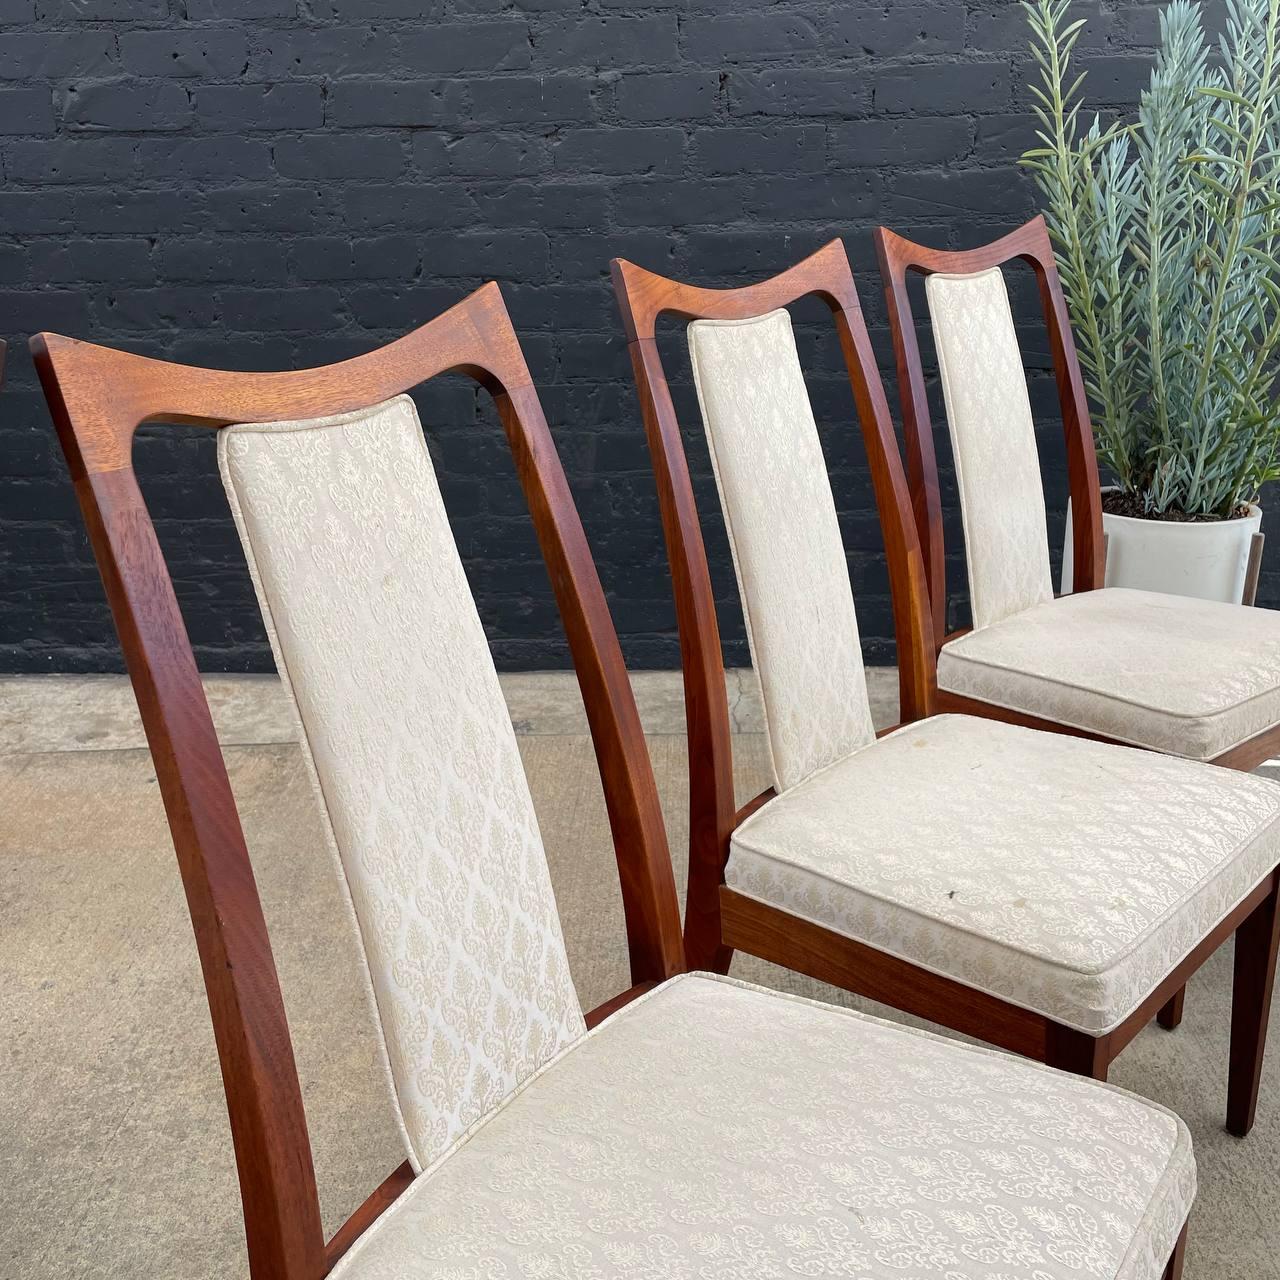 Set of 6 Mid-Century Modern Walnut Dining Chairs by John Kapel For Sale 1